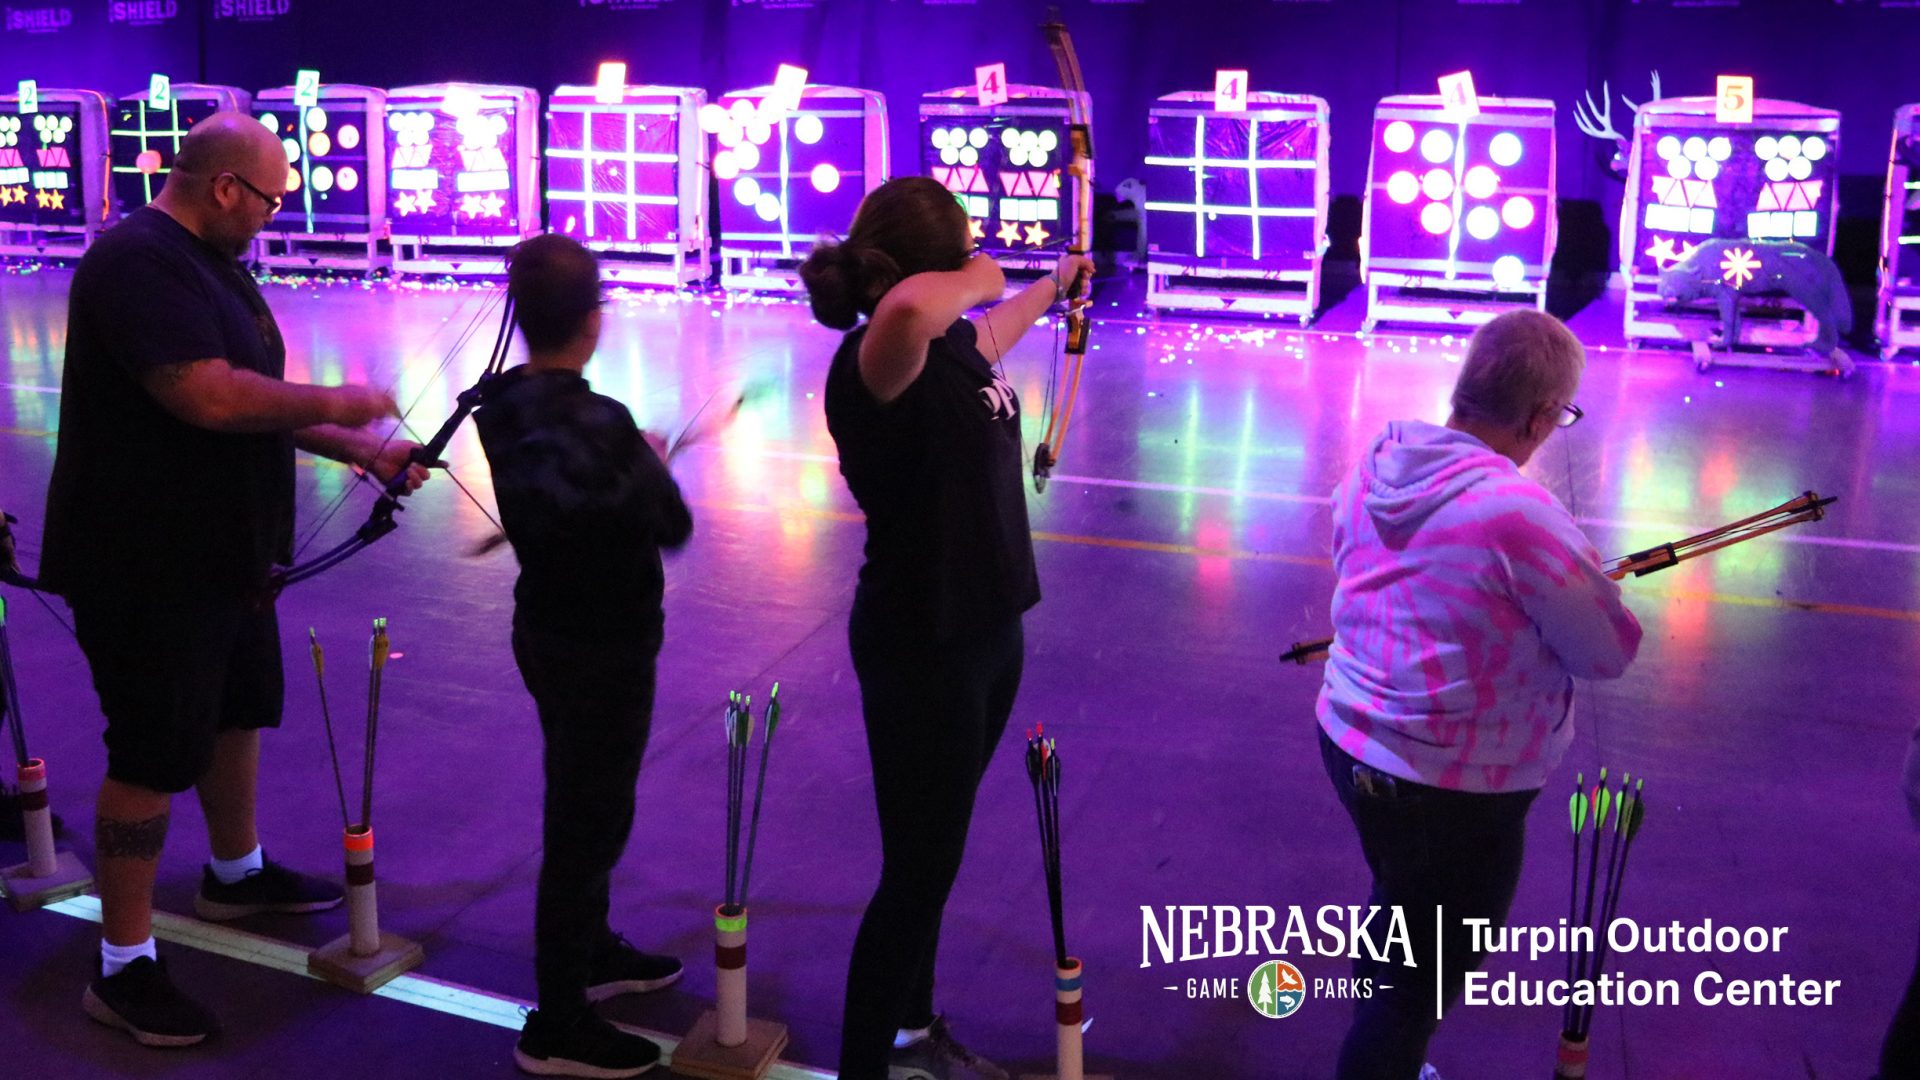 Family using bows on indoor archery range with purple lighting and glowing targets